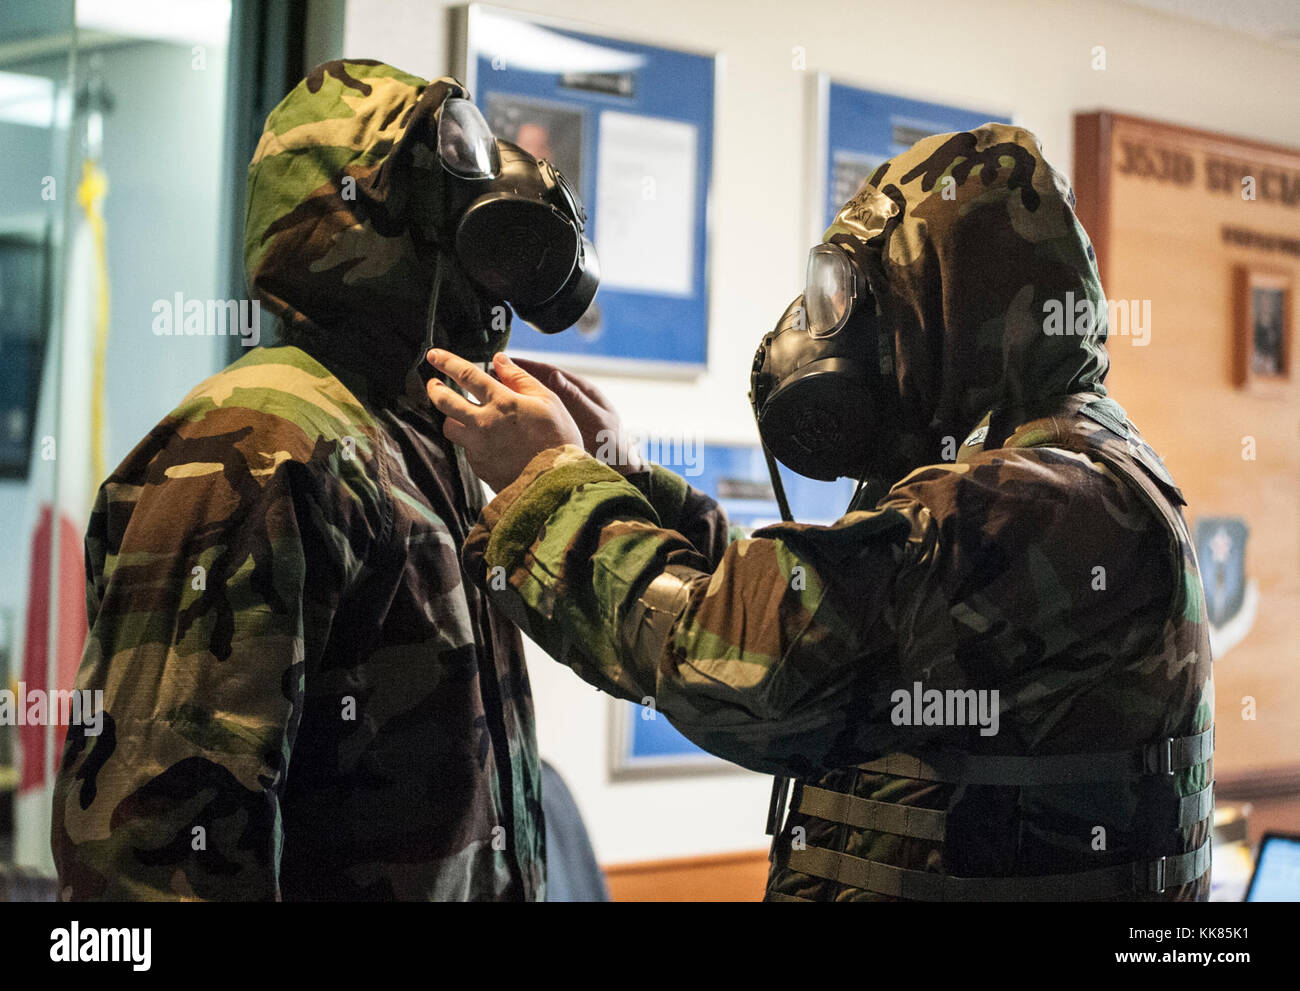 U.S. Air Force 353rd Special Operations Group Airmen don protective gear during an Ability to Survive and Operate (ATSO) exercise Nov. 3, 2017, at Kadena Air Base, Japan. The integrated ATSO and chemical, biological, radiological and nuclear (CBRN) readiness exercise educated Airmen on protective measures for CBRN defense. (U.S. Air Force photo by Capt. Jessica Tait) Stock Photo